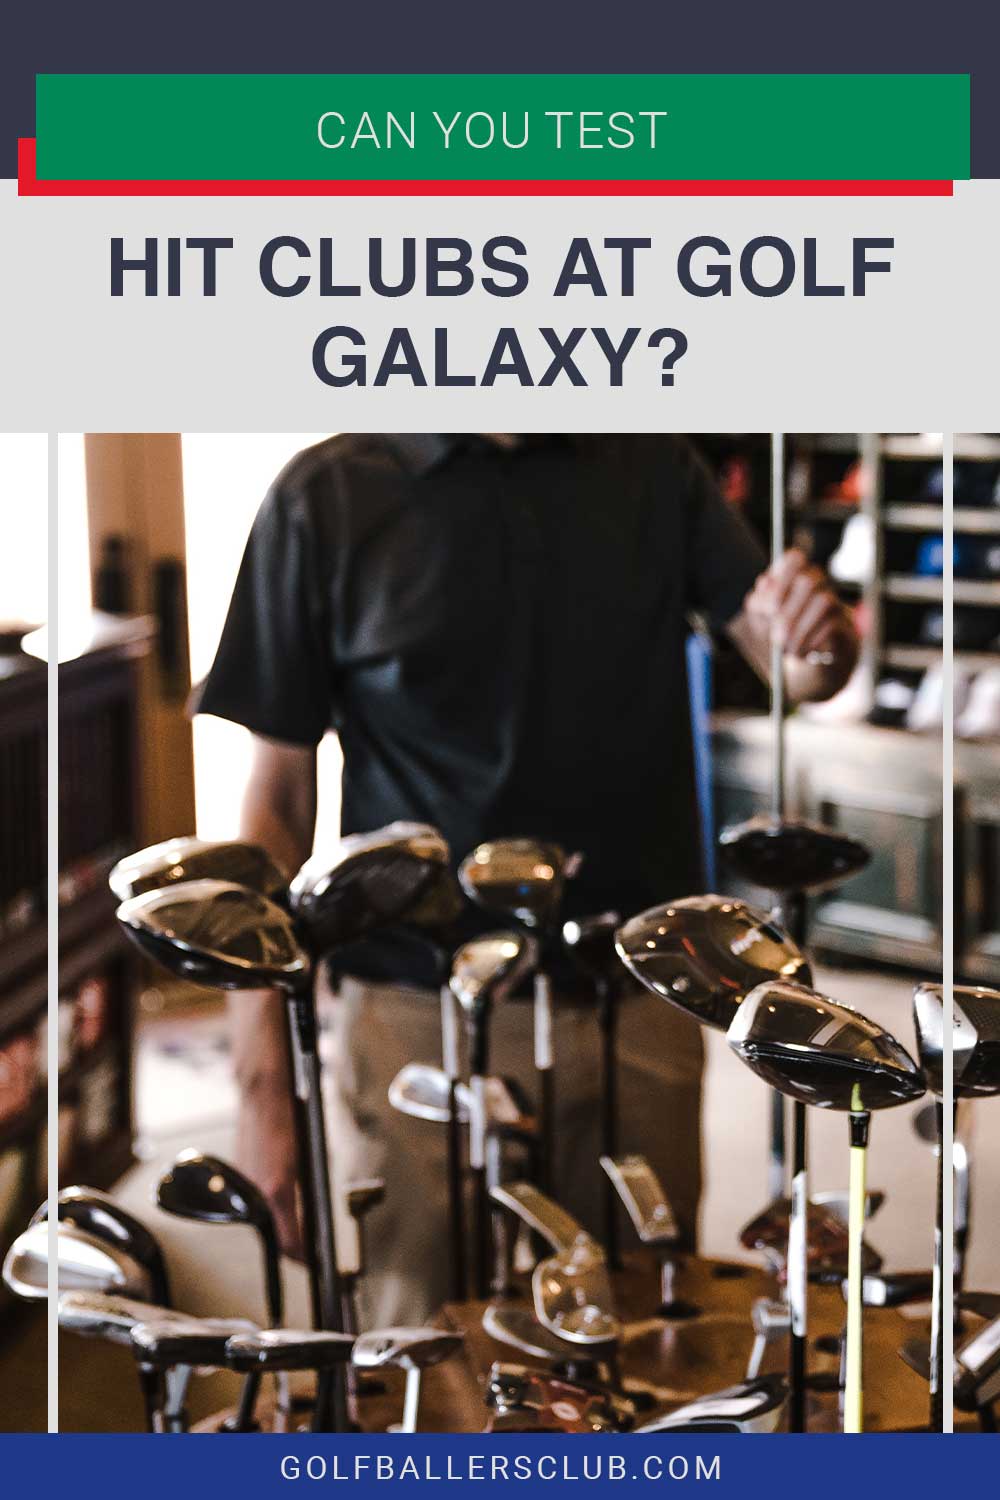 Man standing in front of a dozens of golf clubs - Can You Test Hit Clubs at Golf Galaxy?